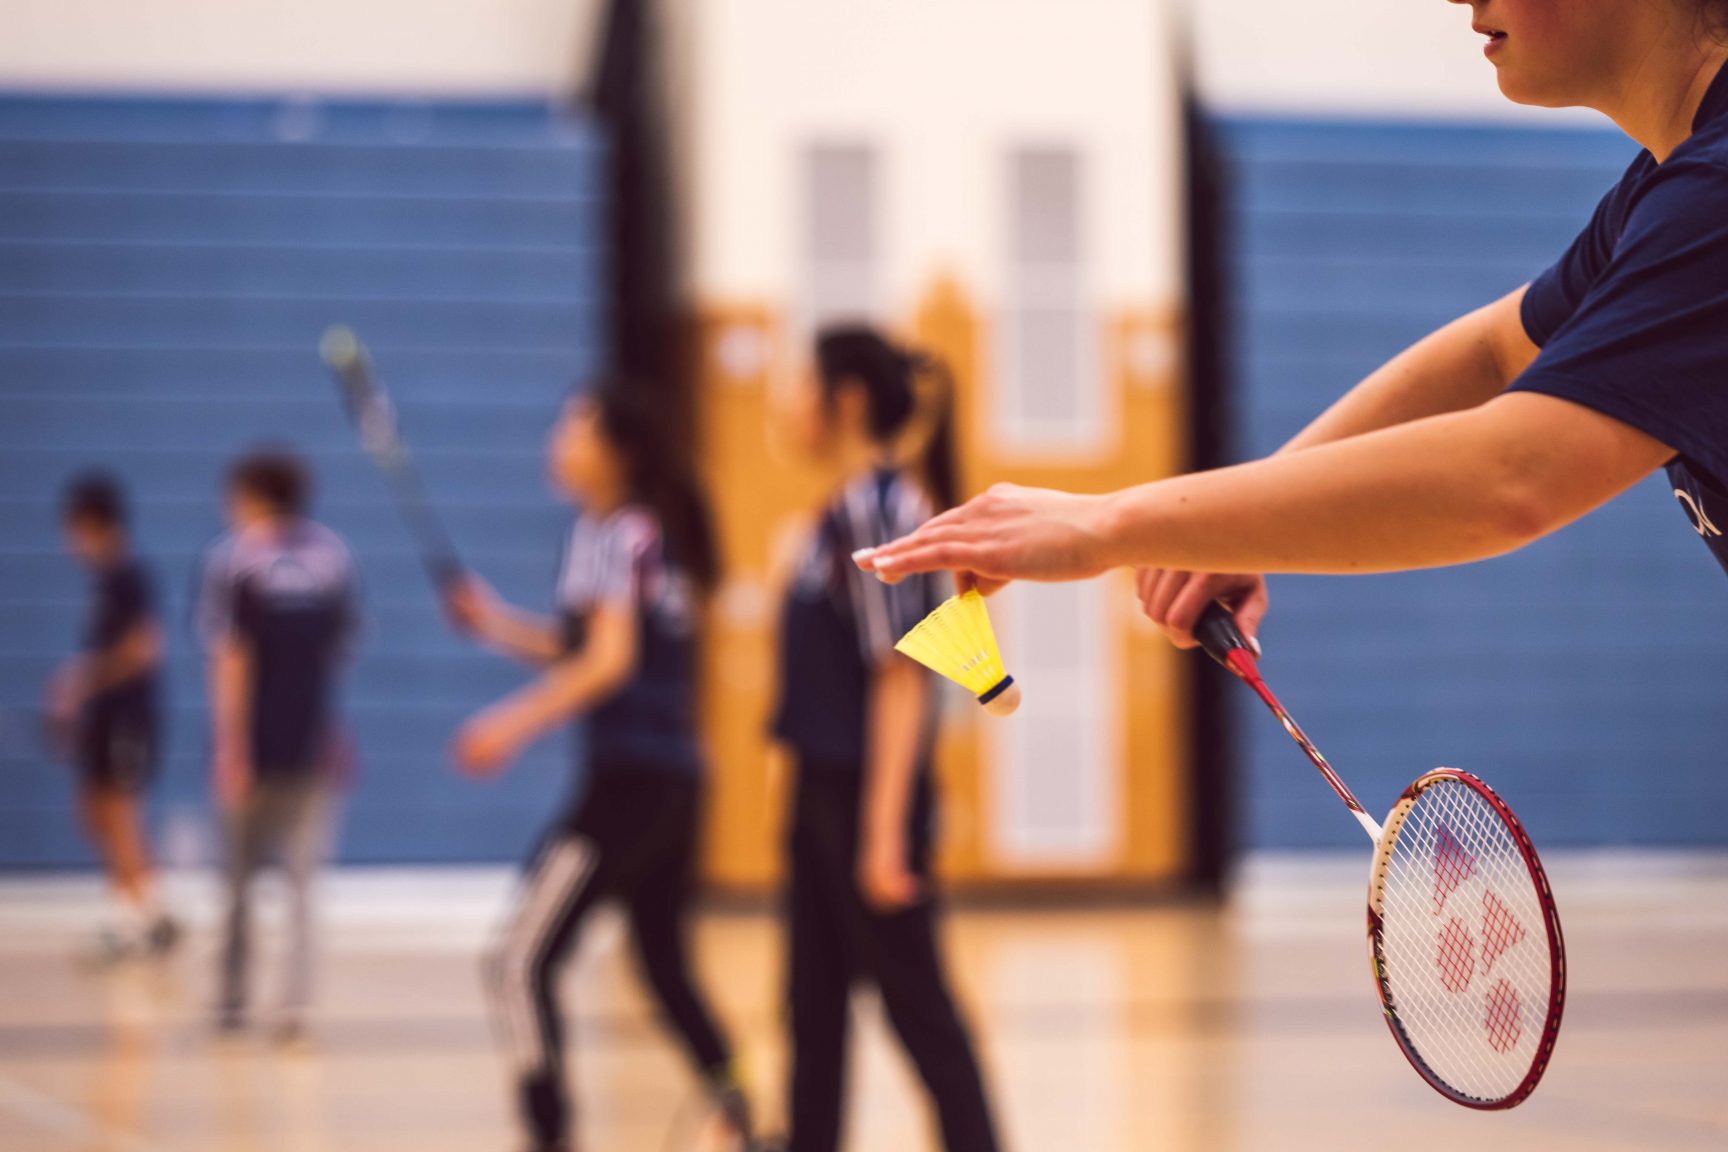 A person about to take aim and serve in a badminton game. There are other games of badminton happening in the background.